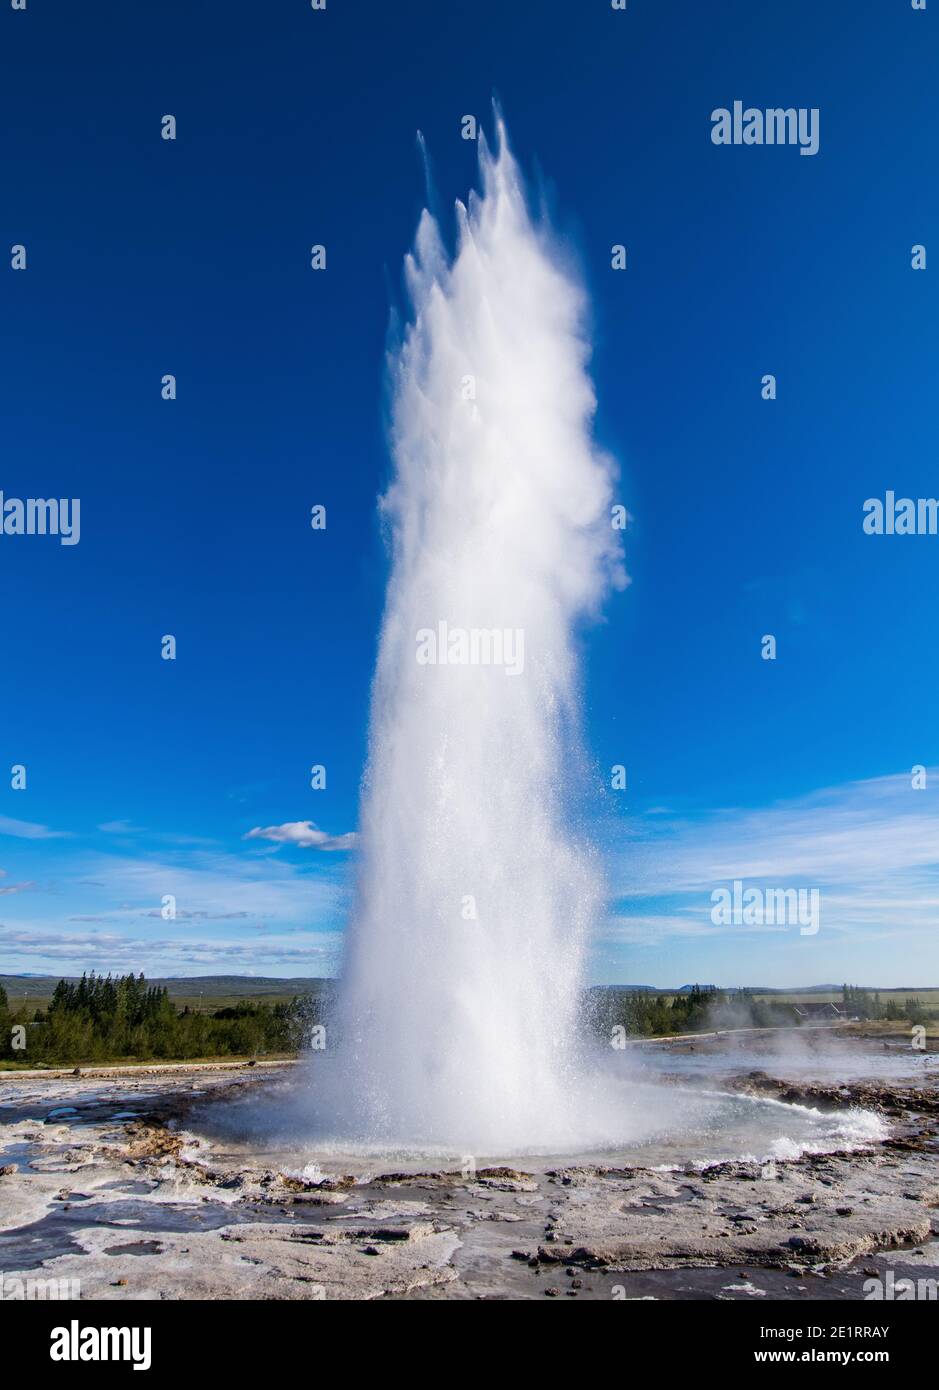 Eruption of the Strokkur geyser at the Haukadalur valley in Iceland Stock Photo